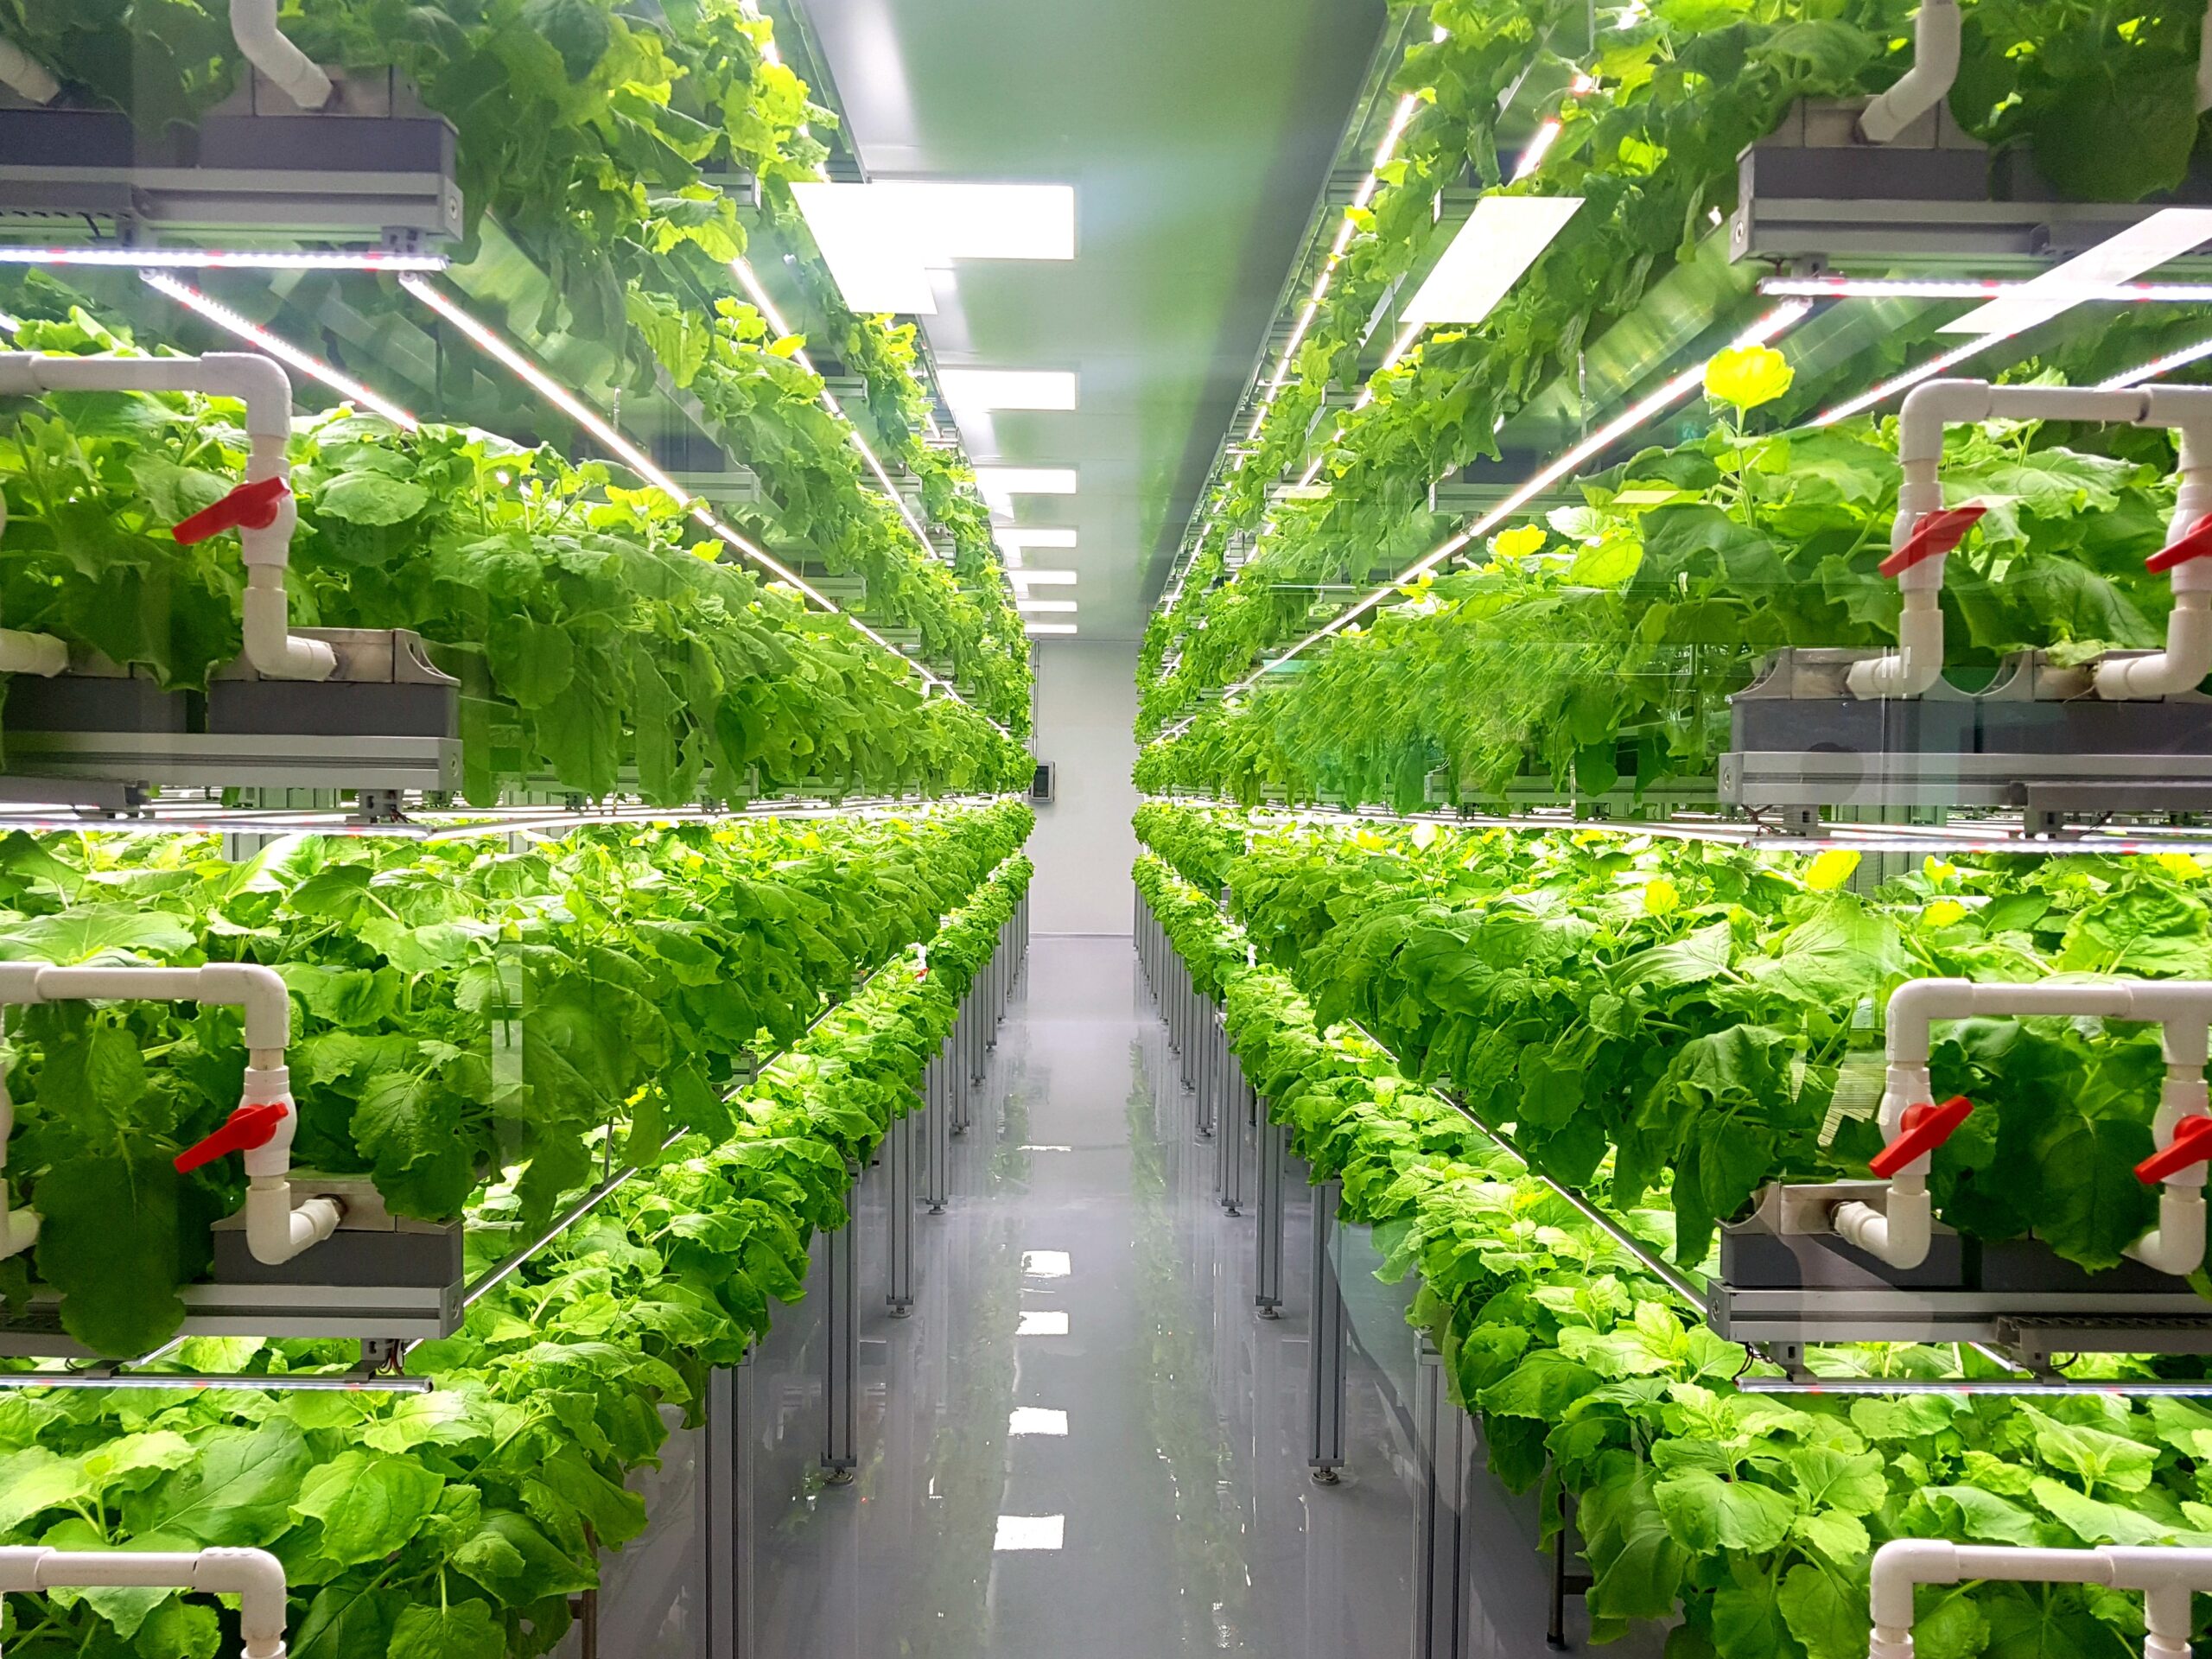 Fresh Vegetables are growing in indoor farm/vertical farm.